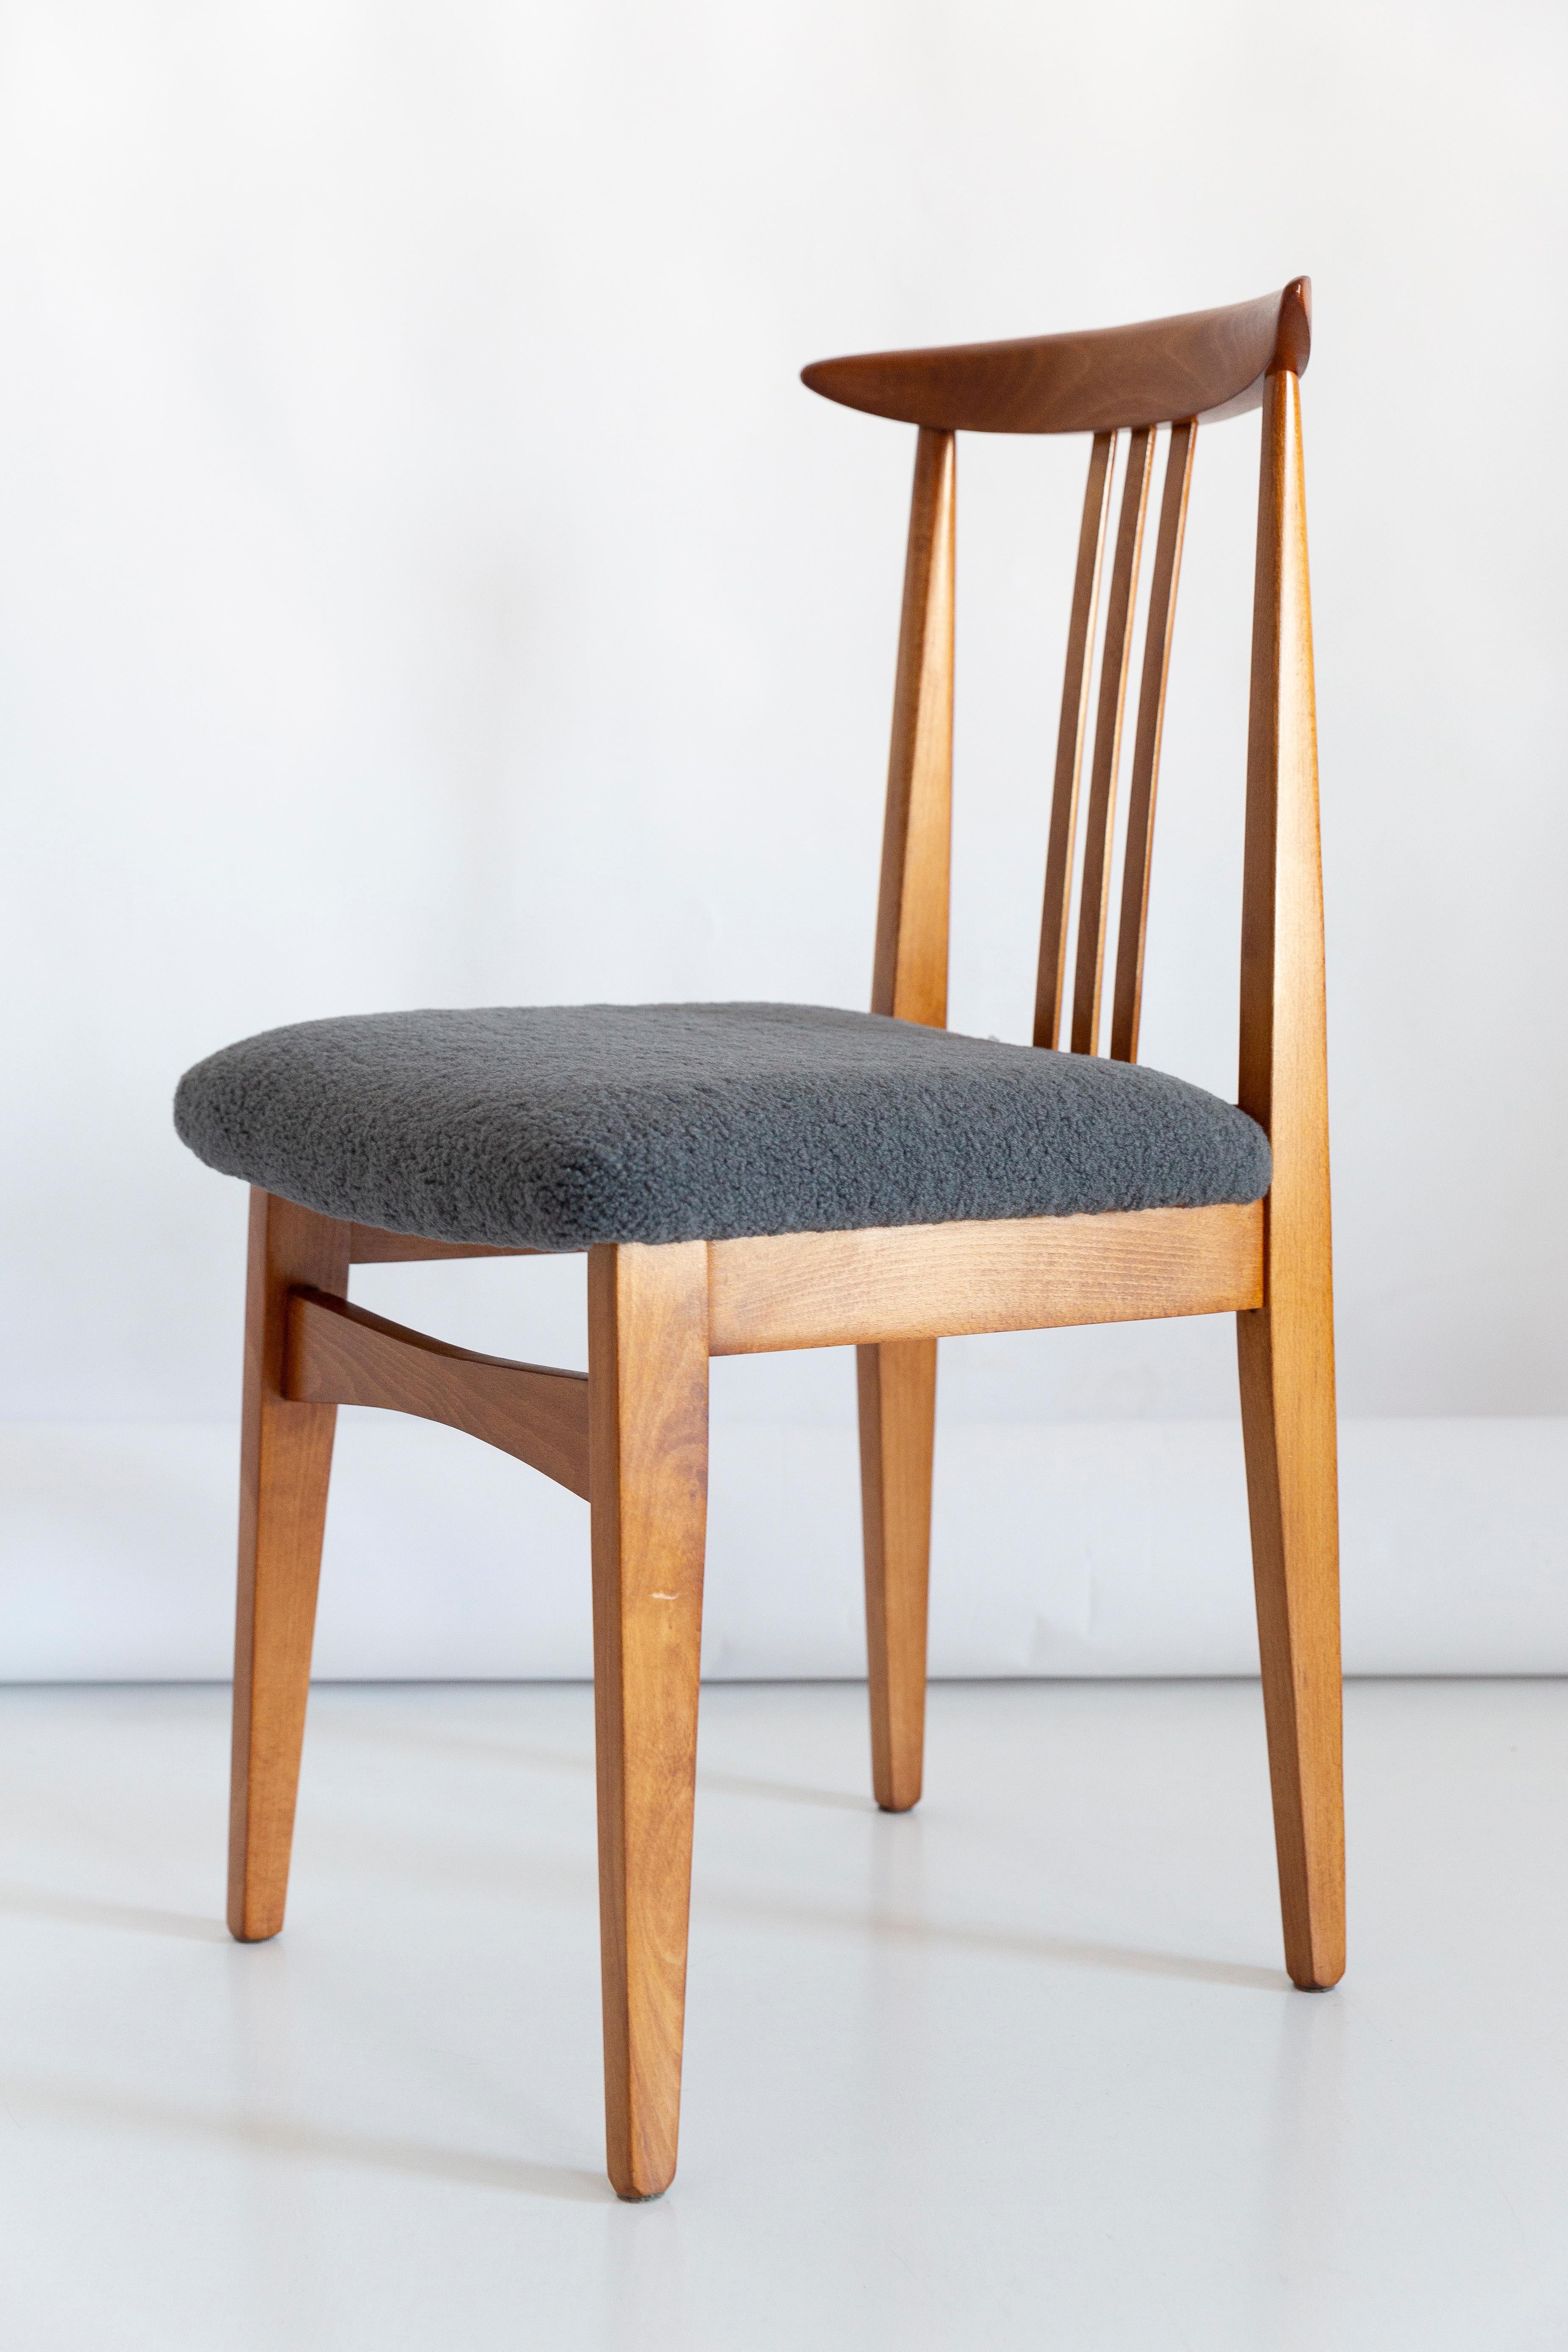 Set of ten beech chairs designed by M. Zielinski, type 200 / 100B. Manufactured by the Opole Furniture Industry Center at the end of the 1960s in Poland. The chairs have undergone a complete carpentry and upholstery renovation. Seats covered with